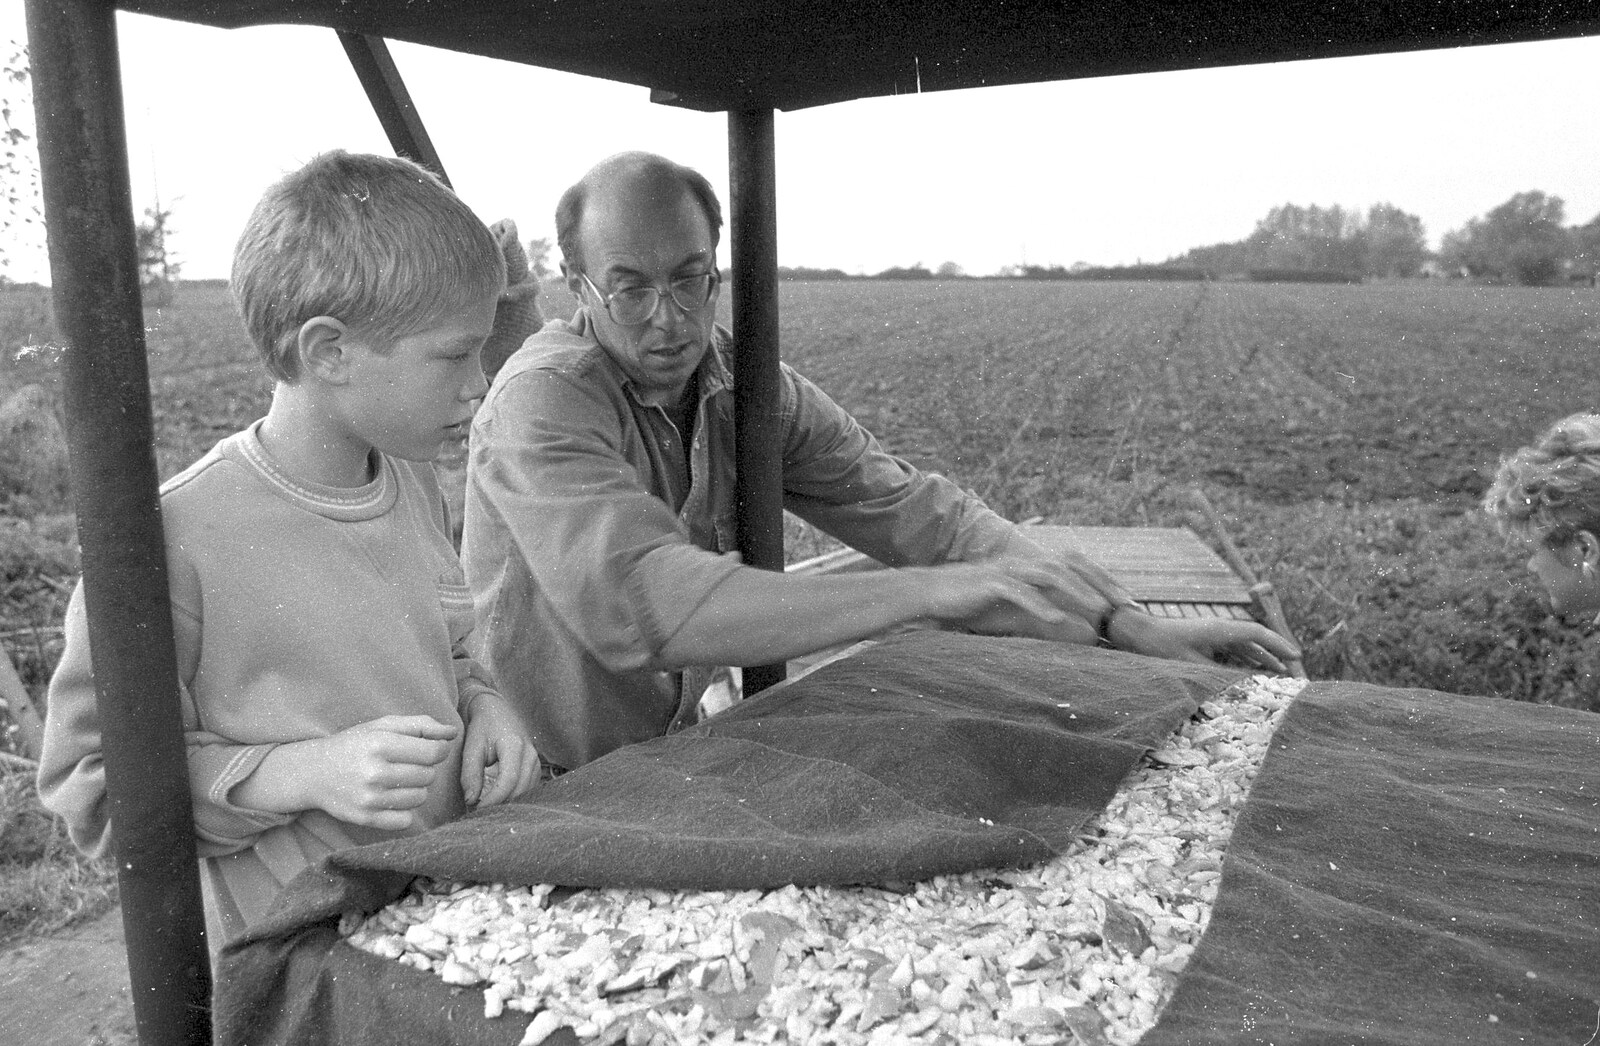 John and George wrap up a cheese from Cider Making in Black and White, Stuston, Suffolk - 11th October 1992